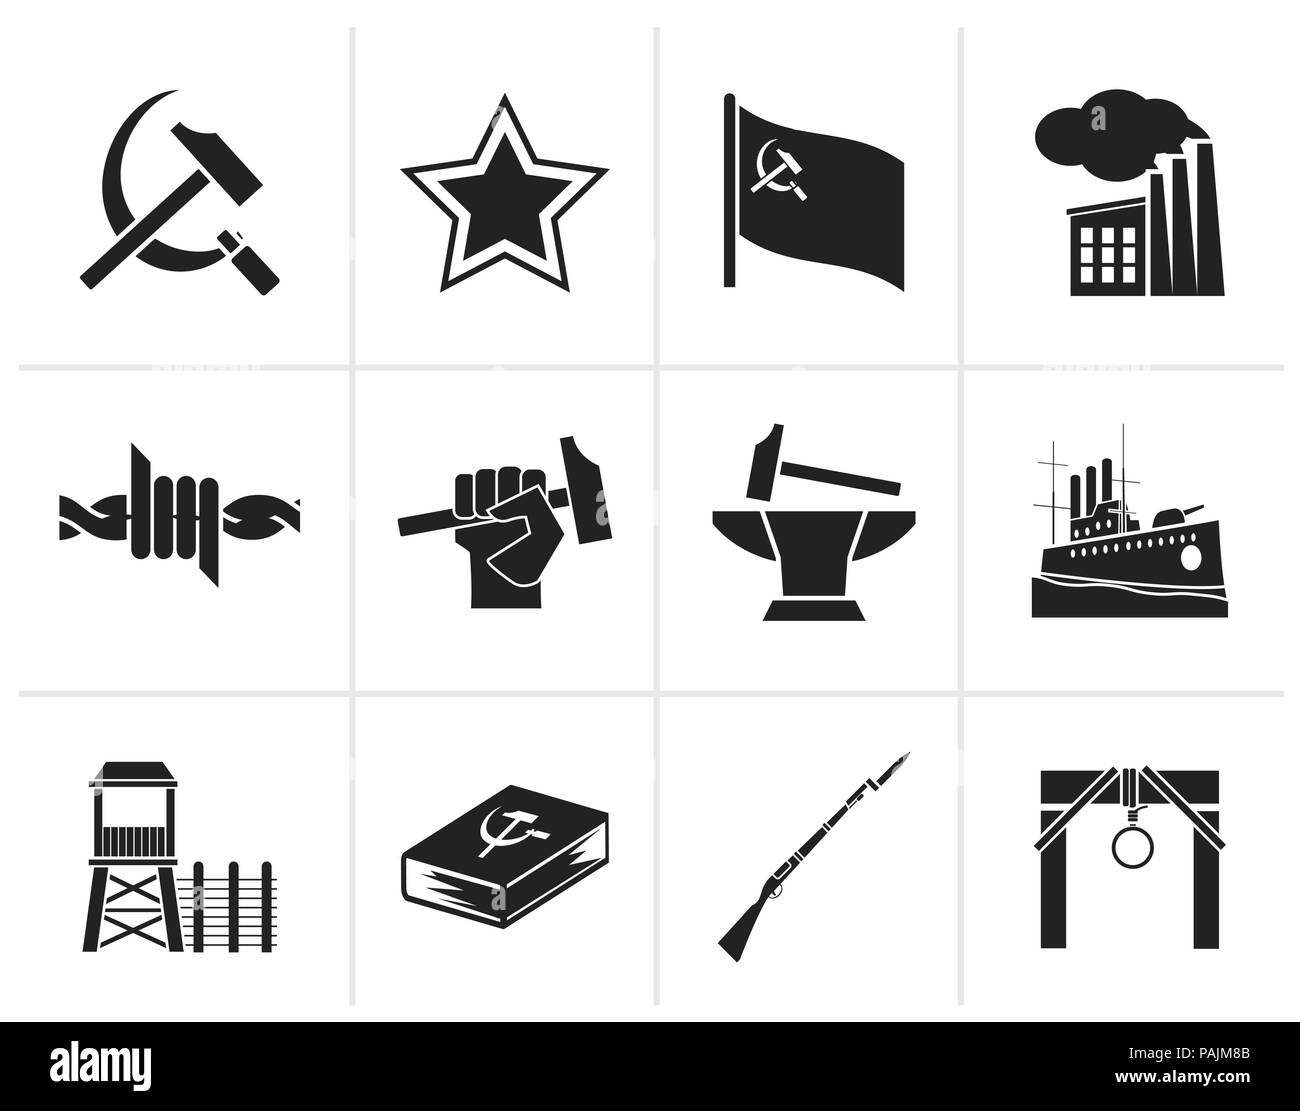 Black Communism, socialism and revolution icons - vector icon set Stock Vector